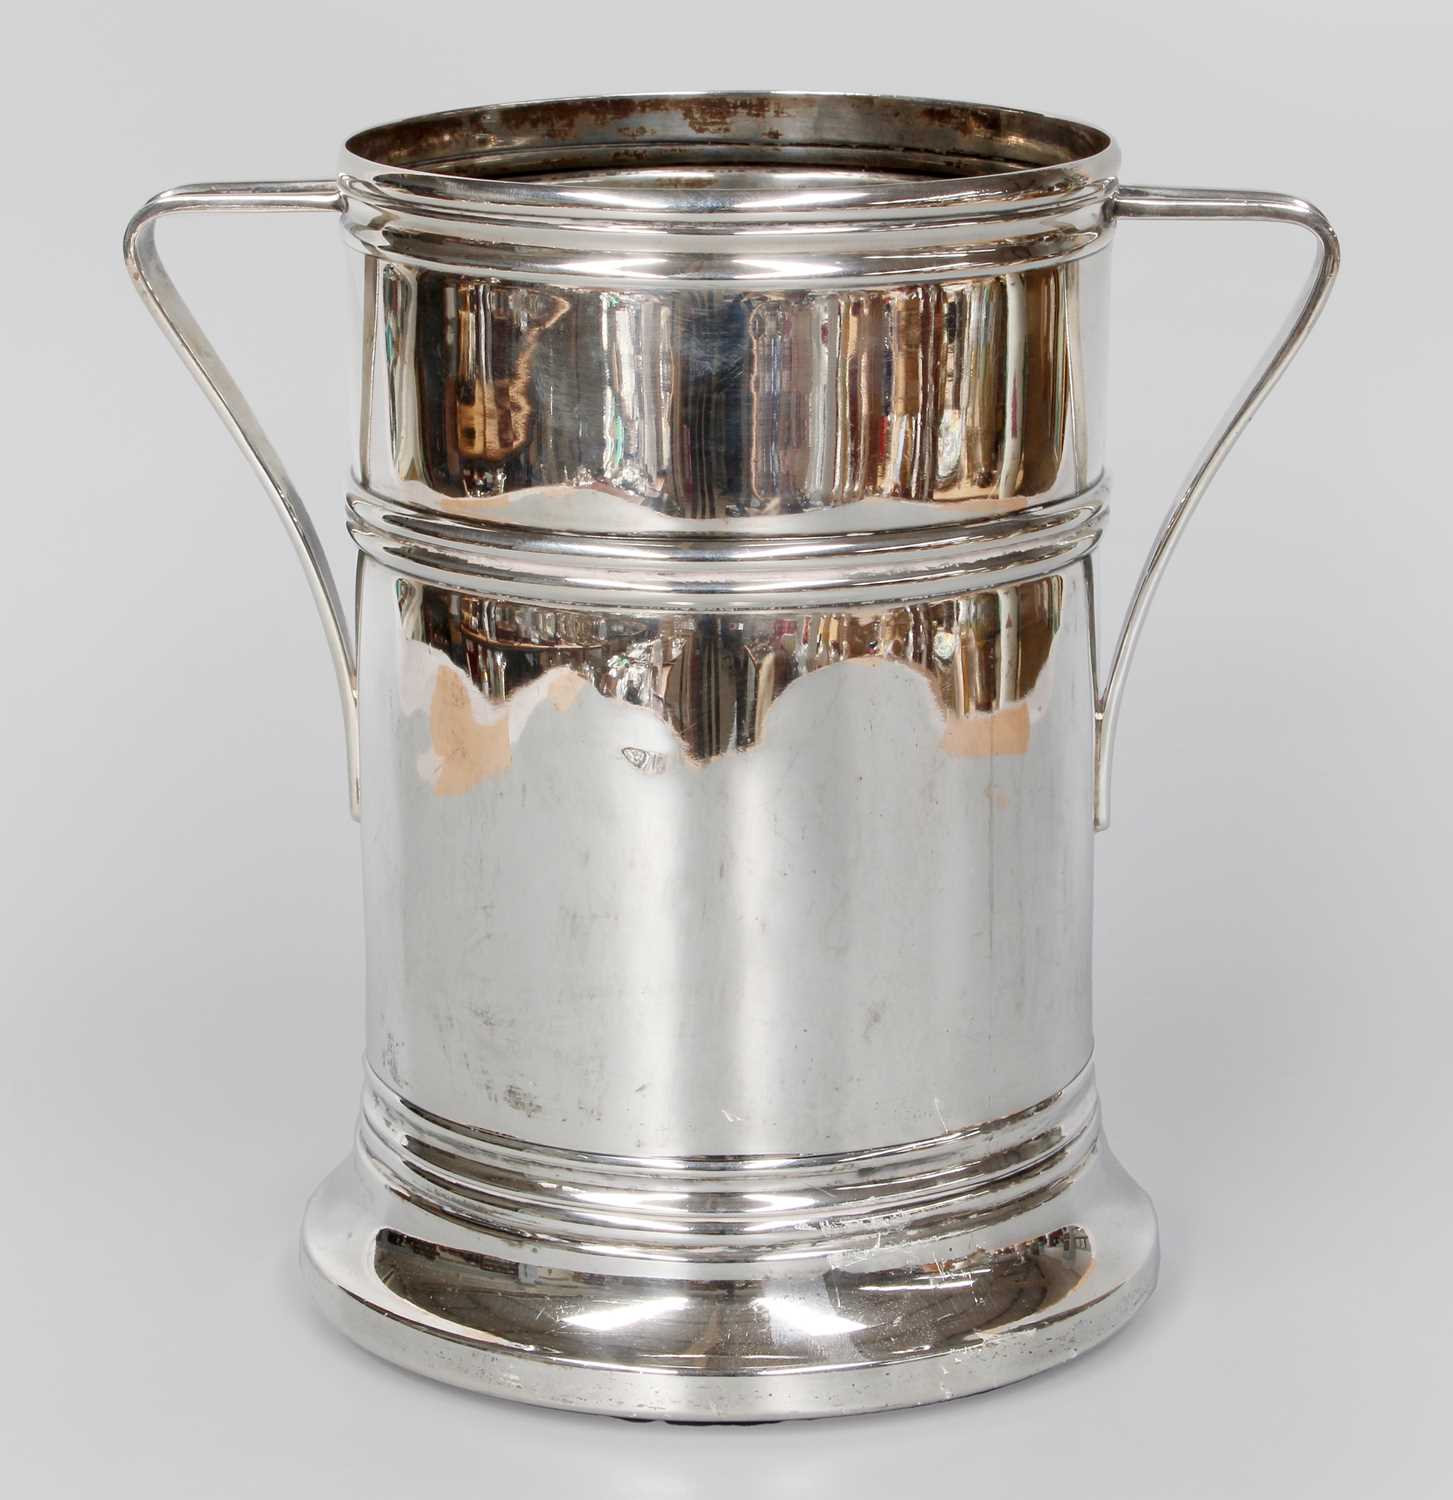 Lot 20 - A George V Silver Syphon-Stand or Wine-Bottle...